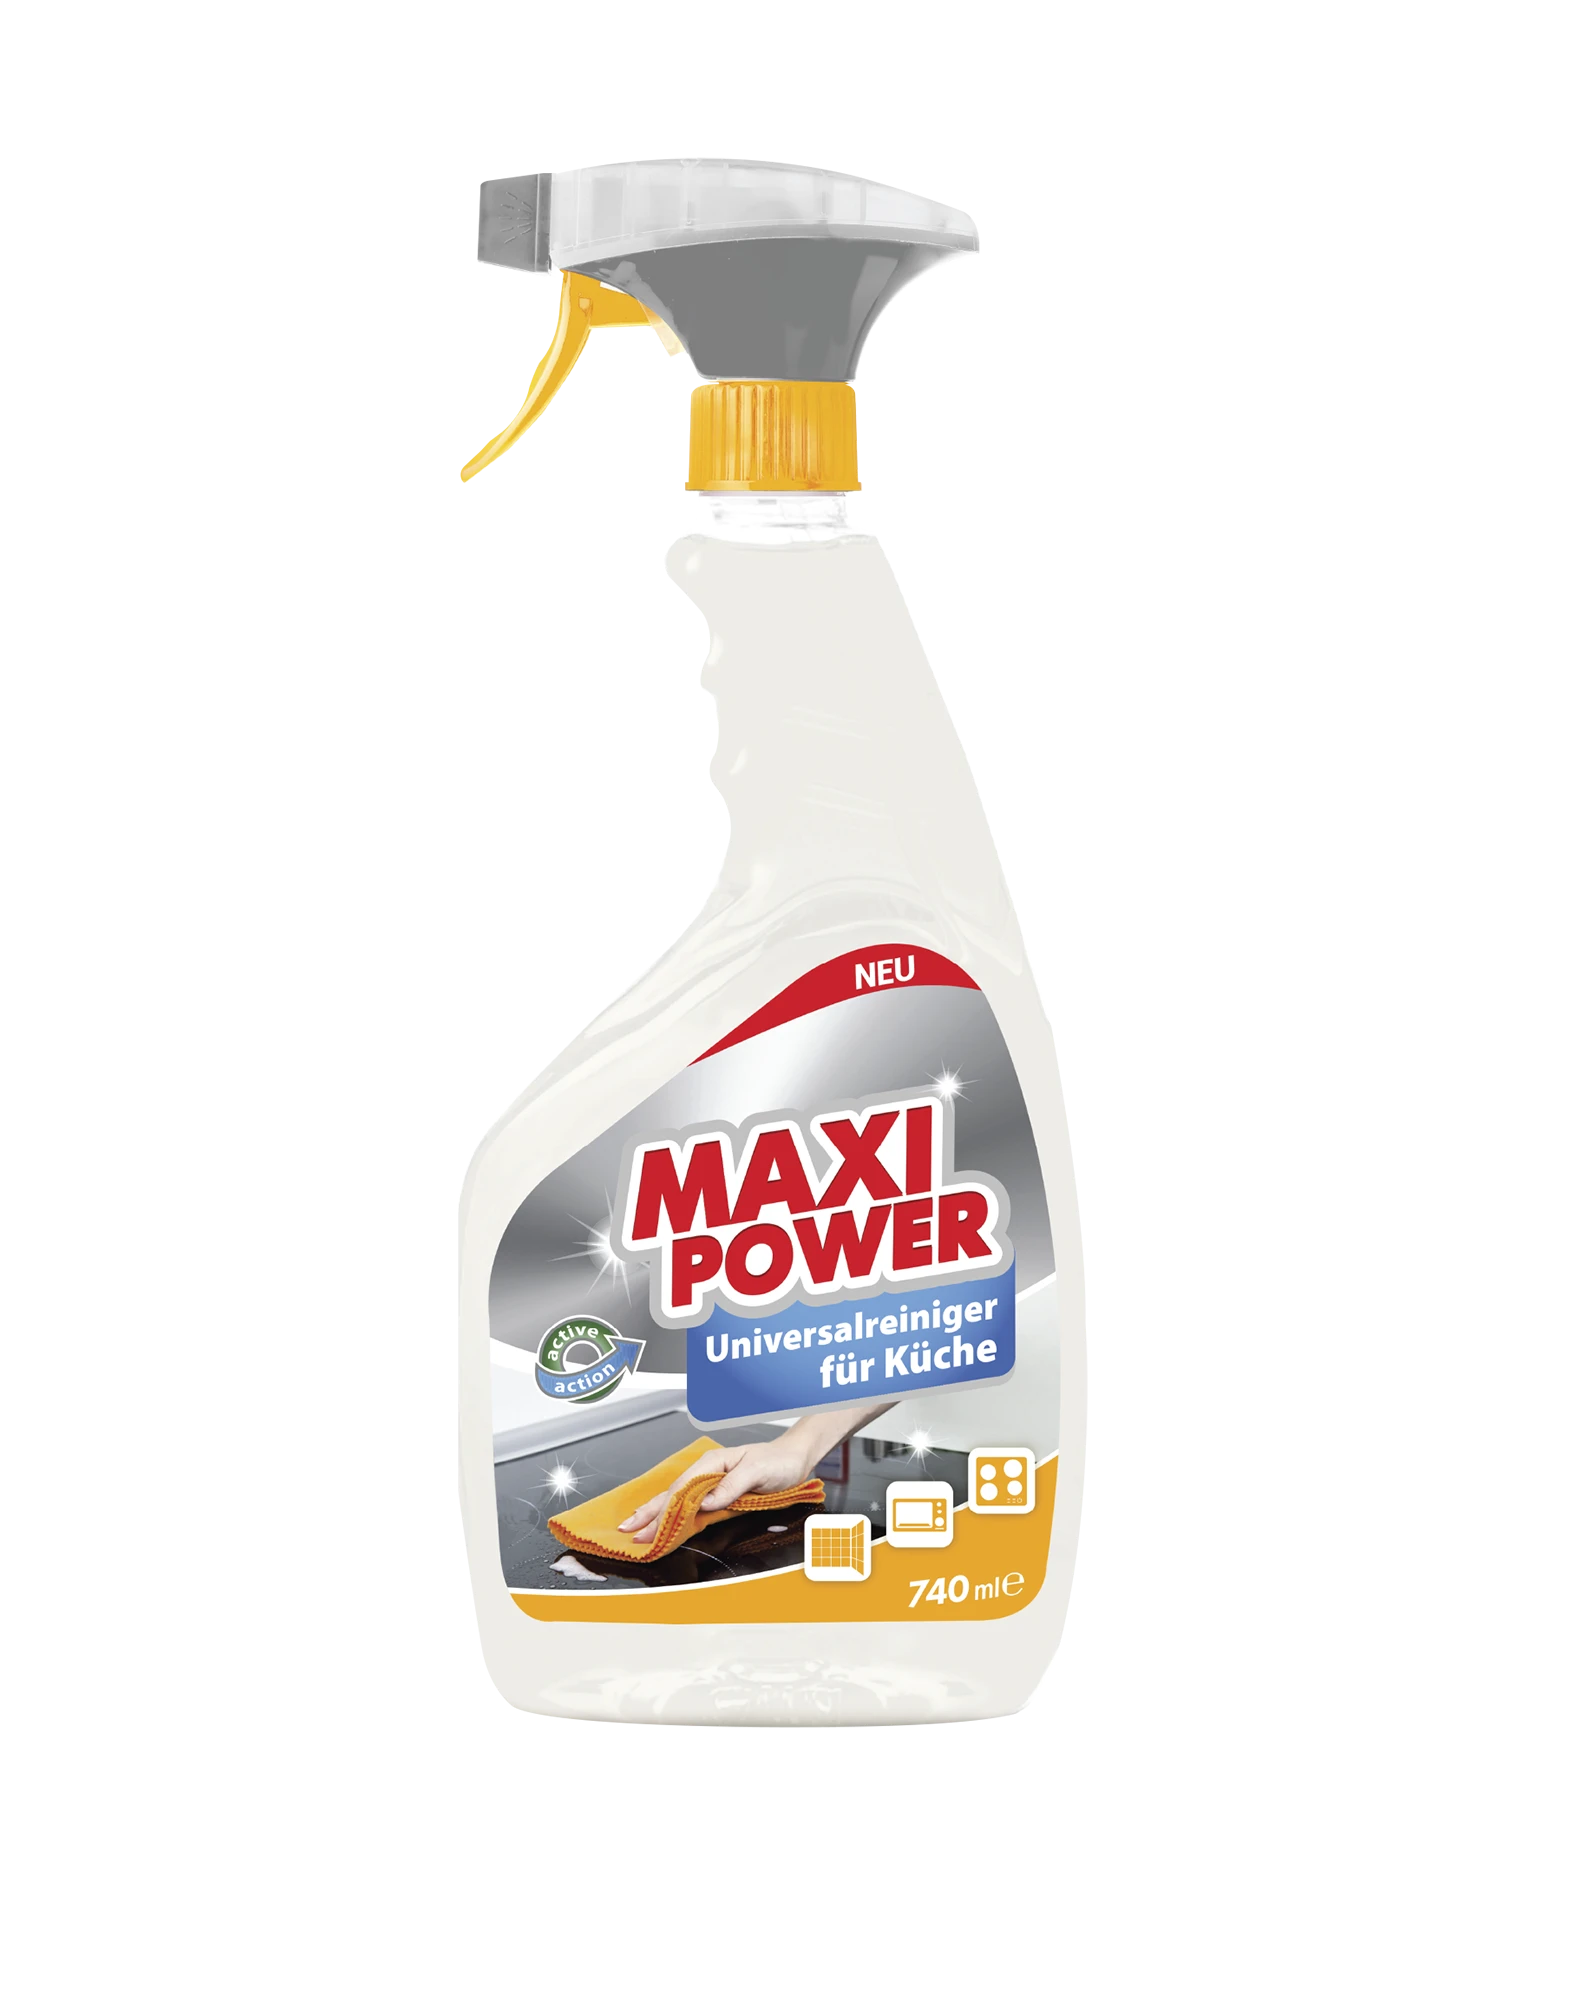 Maxi Power All-Purpose Cleaner For kitchen on work surfaces